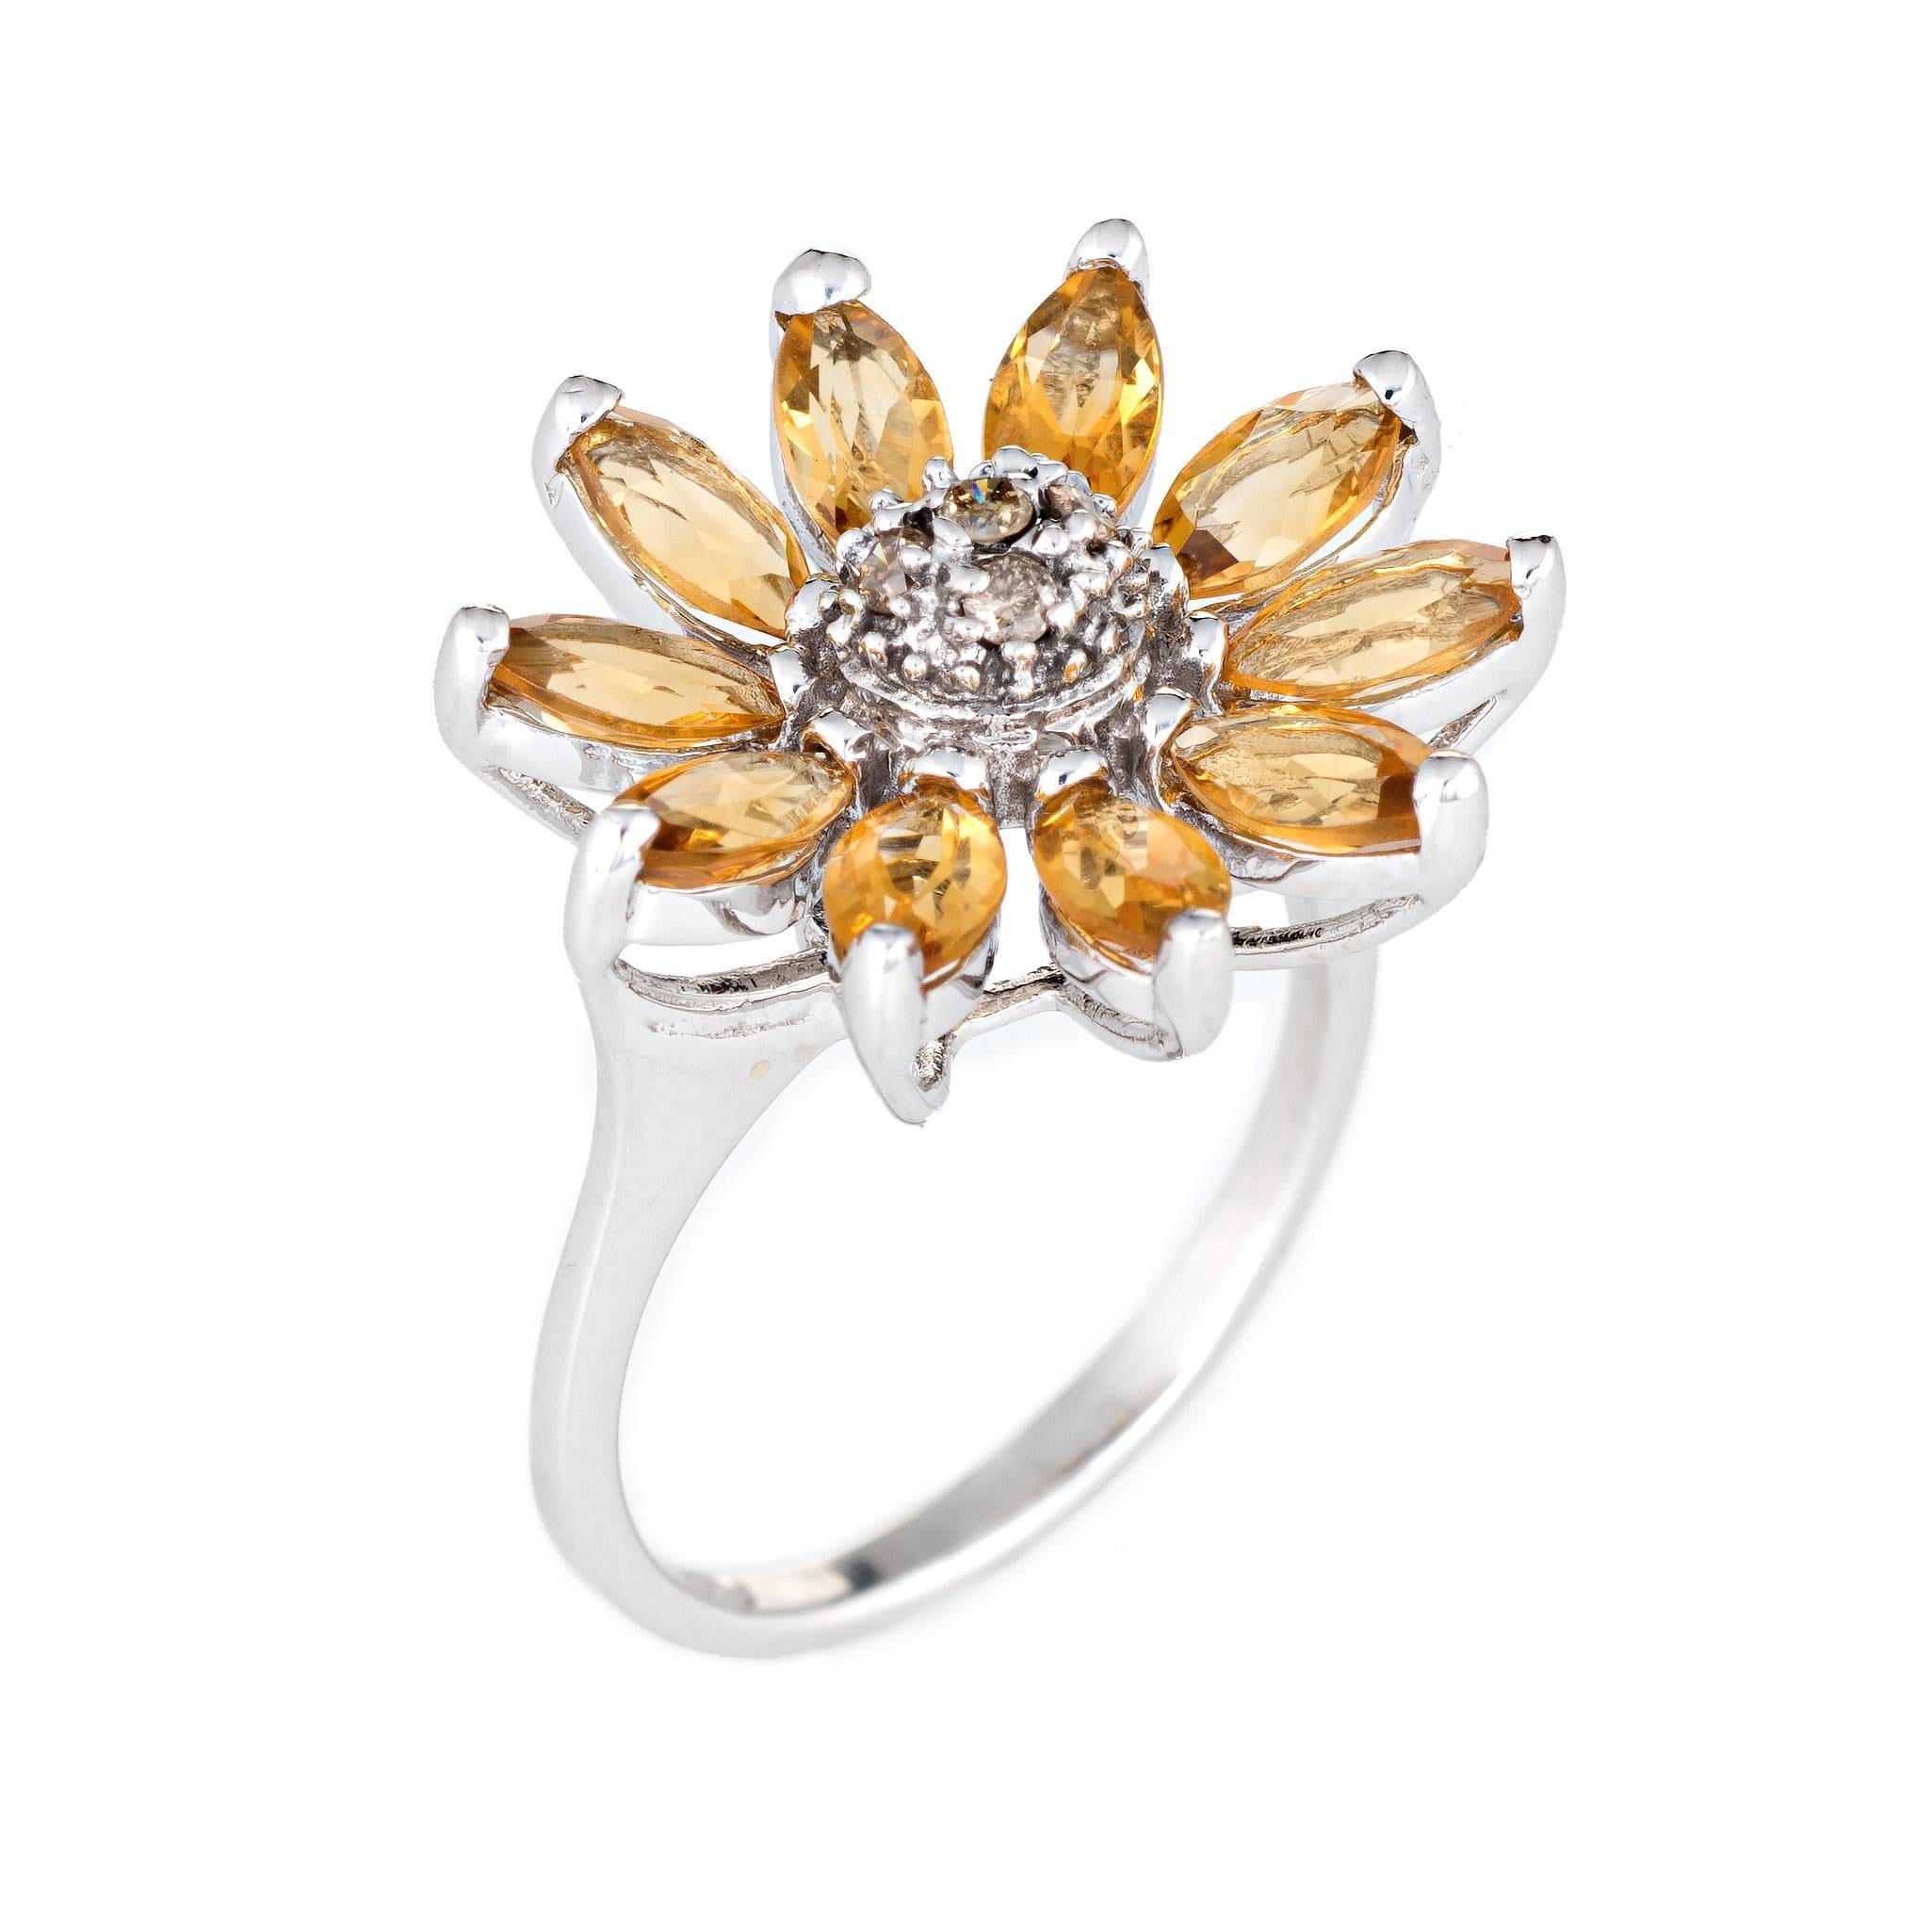 Stylish estate sunflower ring crafted in 14 karat white gold. 

10 marquise cut citrines are estimated at 0.15 carats each (1.50 carats total estimated weight), accented with an estimated 0.05 carats of diamonds (estimated at L-M color and SI2-I1